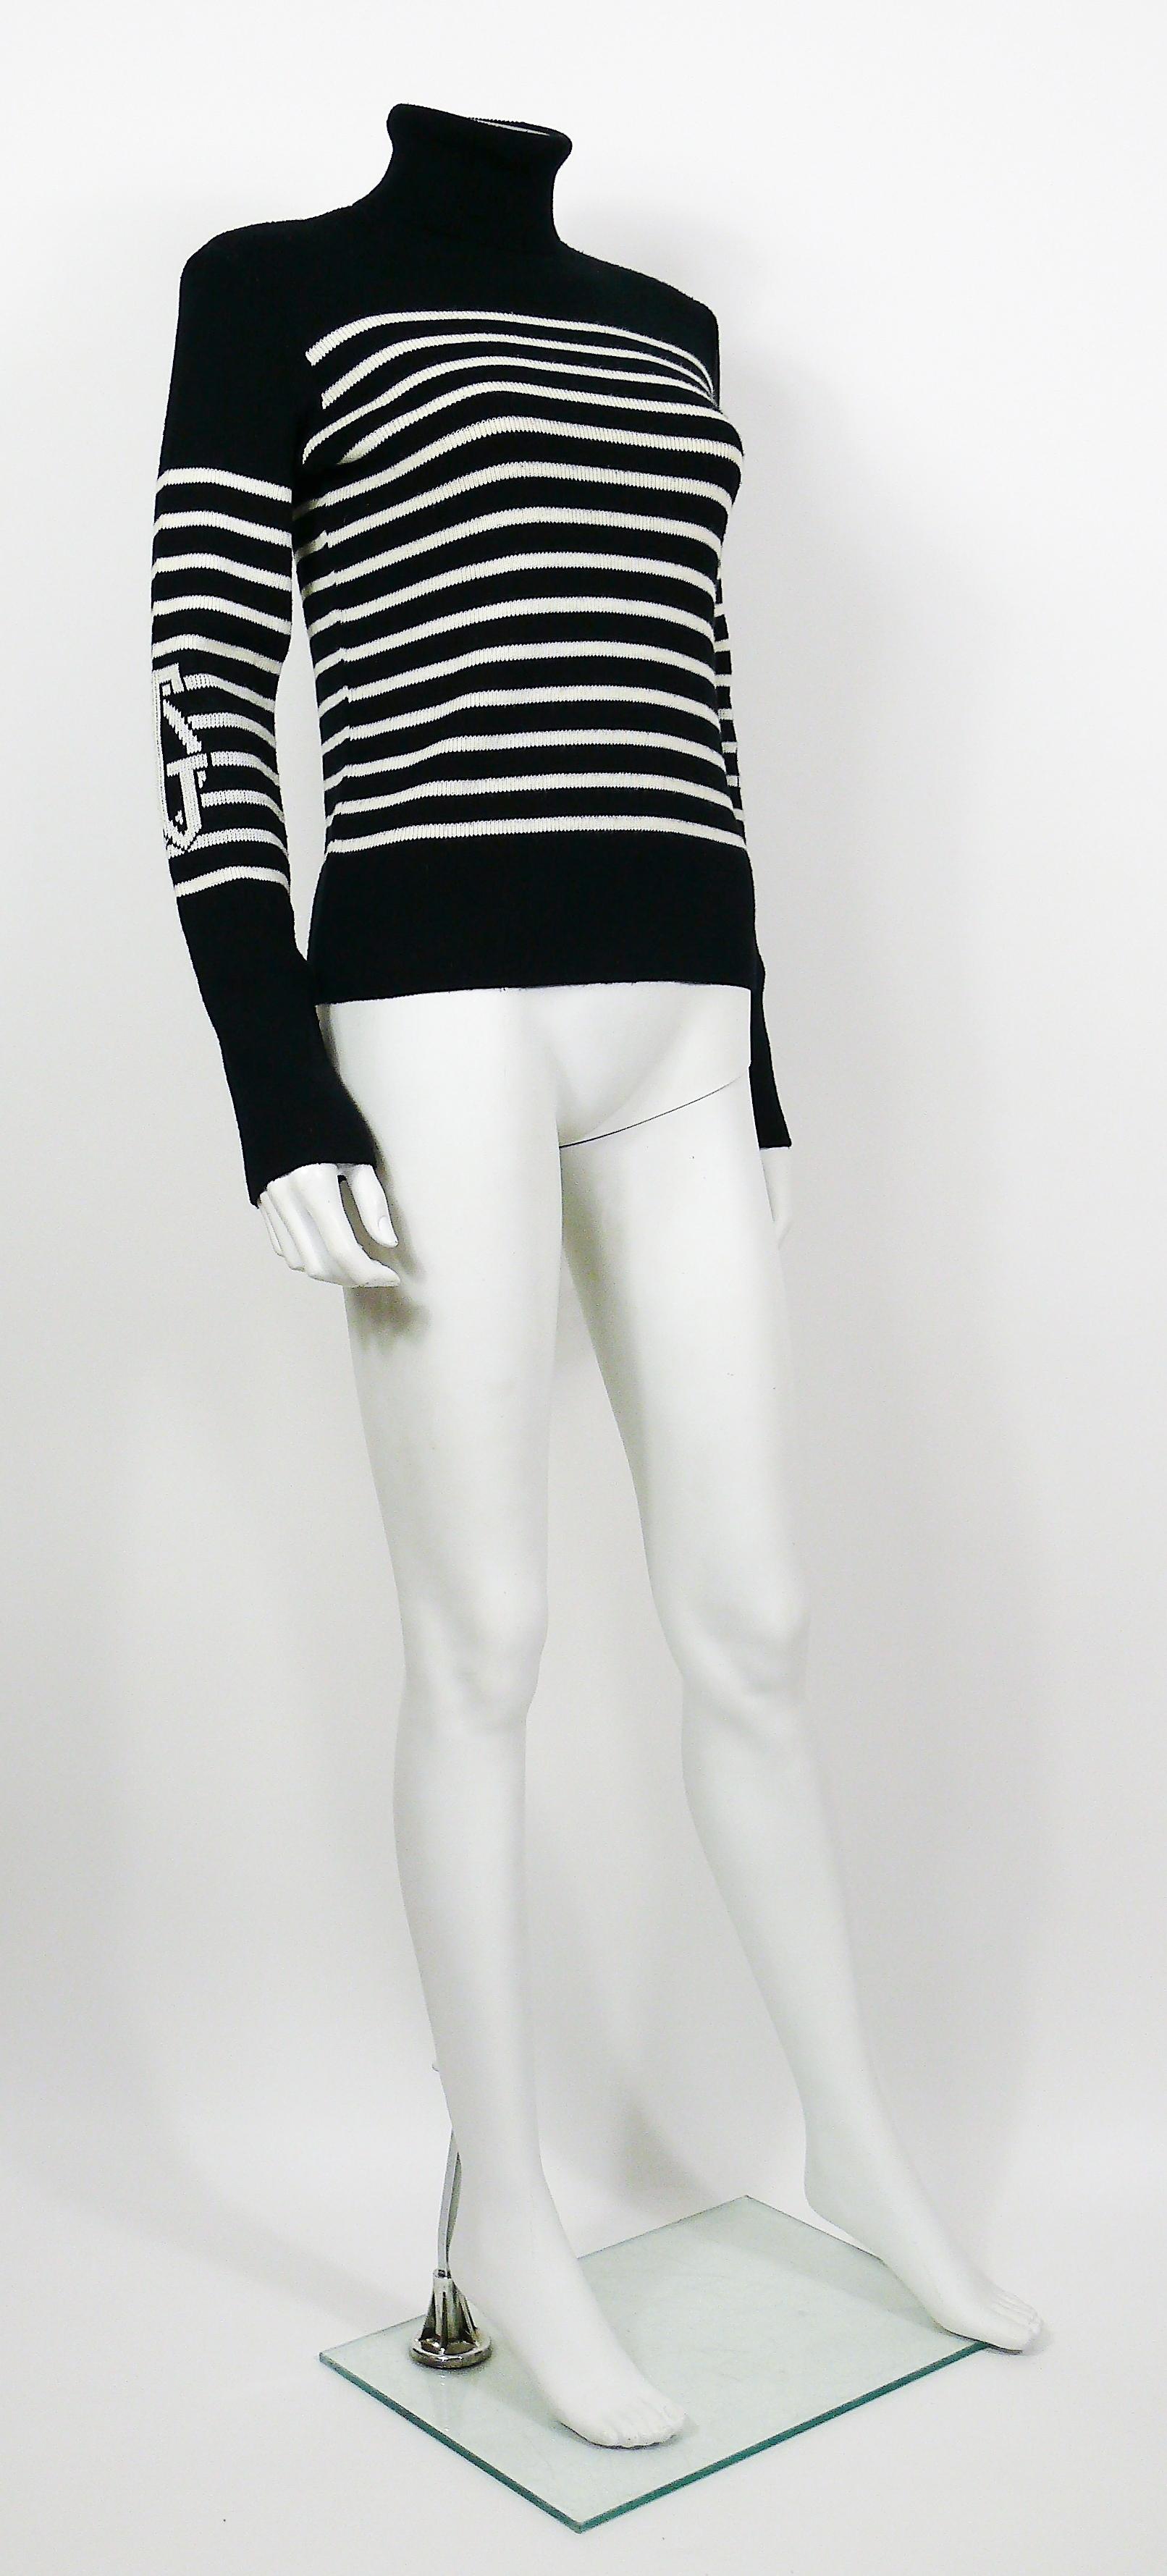 JEAN PAUL GAULTIER vintage iconic wool blend black/white matelot sweater featuring large JPG monogram on each sleeve.

Turtle neck.
Long sleeves.

Label reads JPG JEAN'S.
Inner label was removed.

Made in Italy.

Composition label reads : 50%